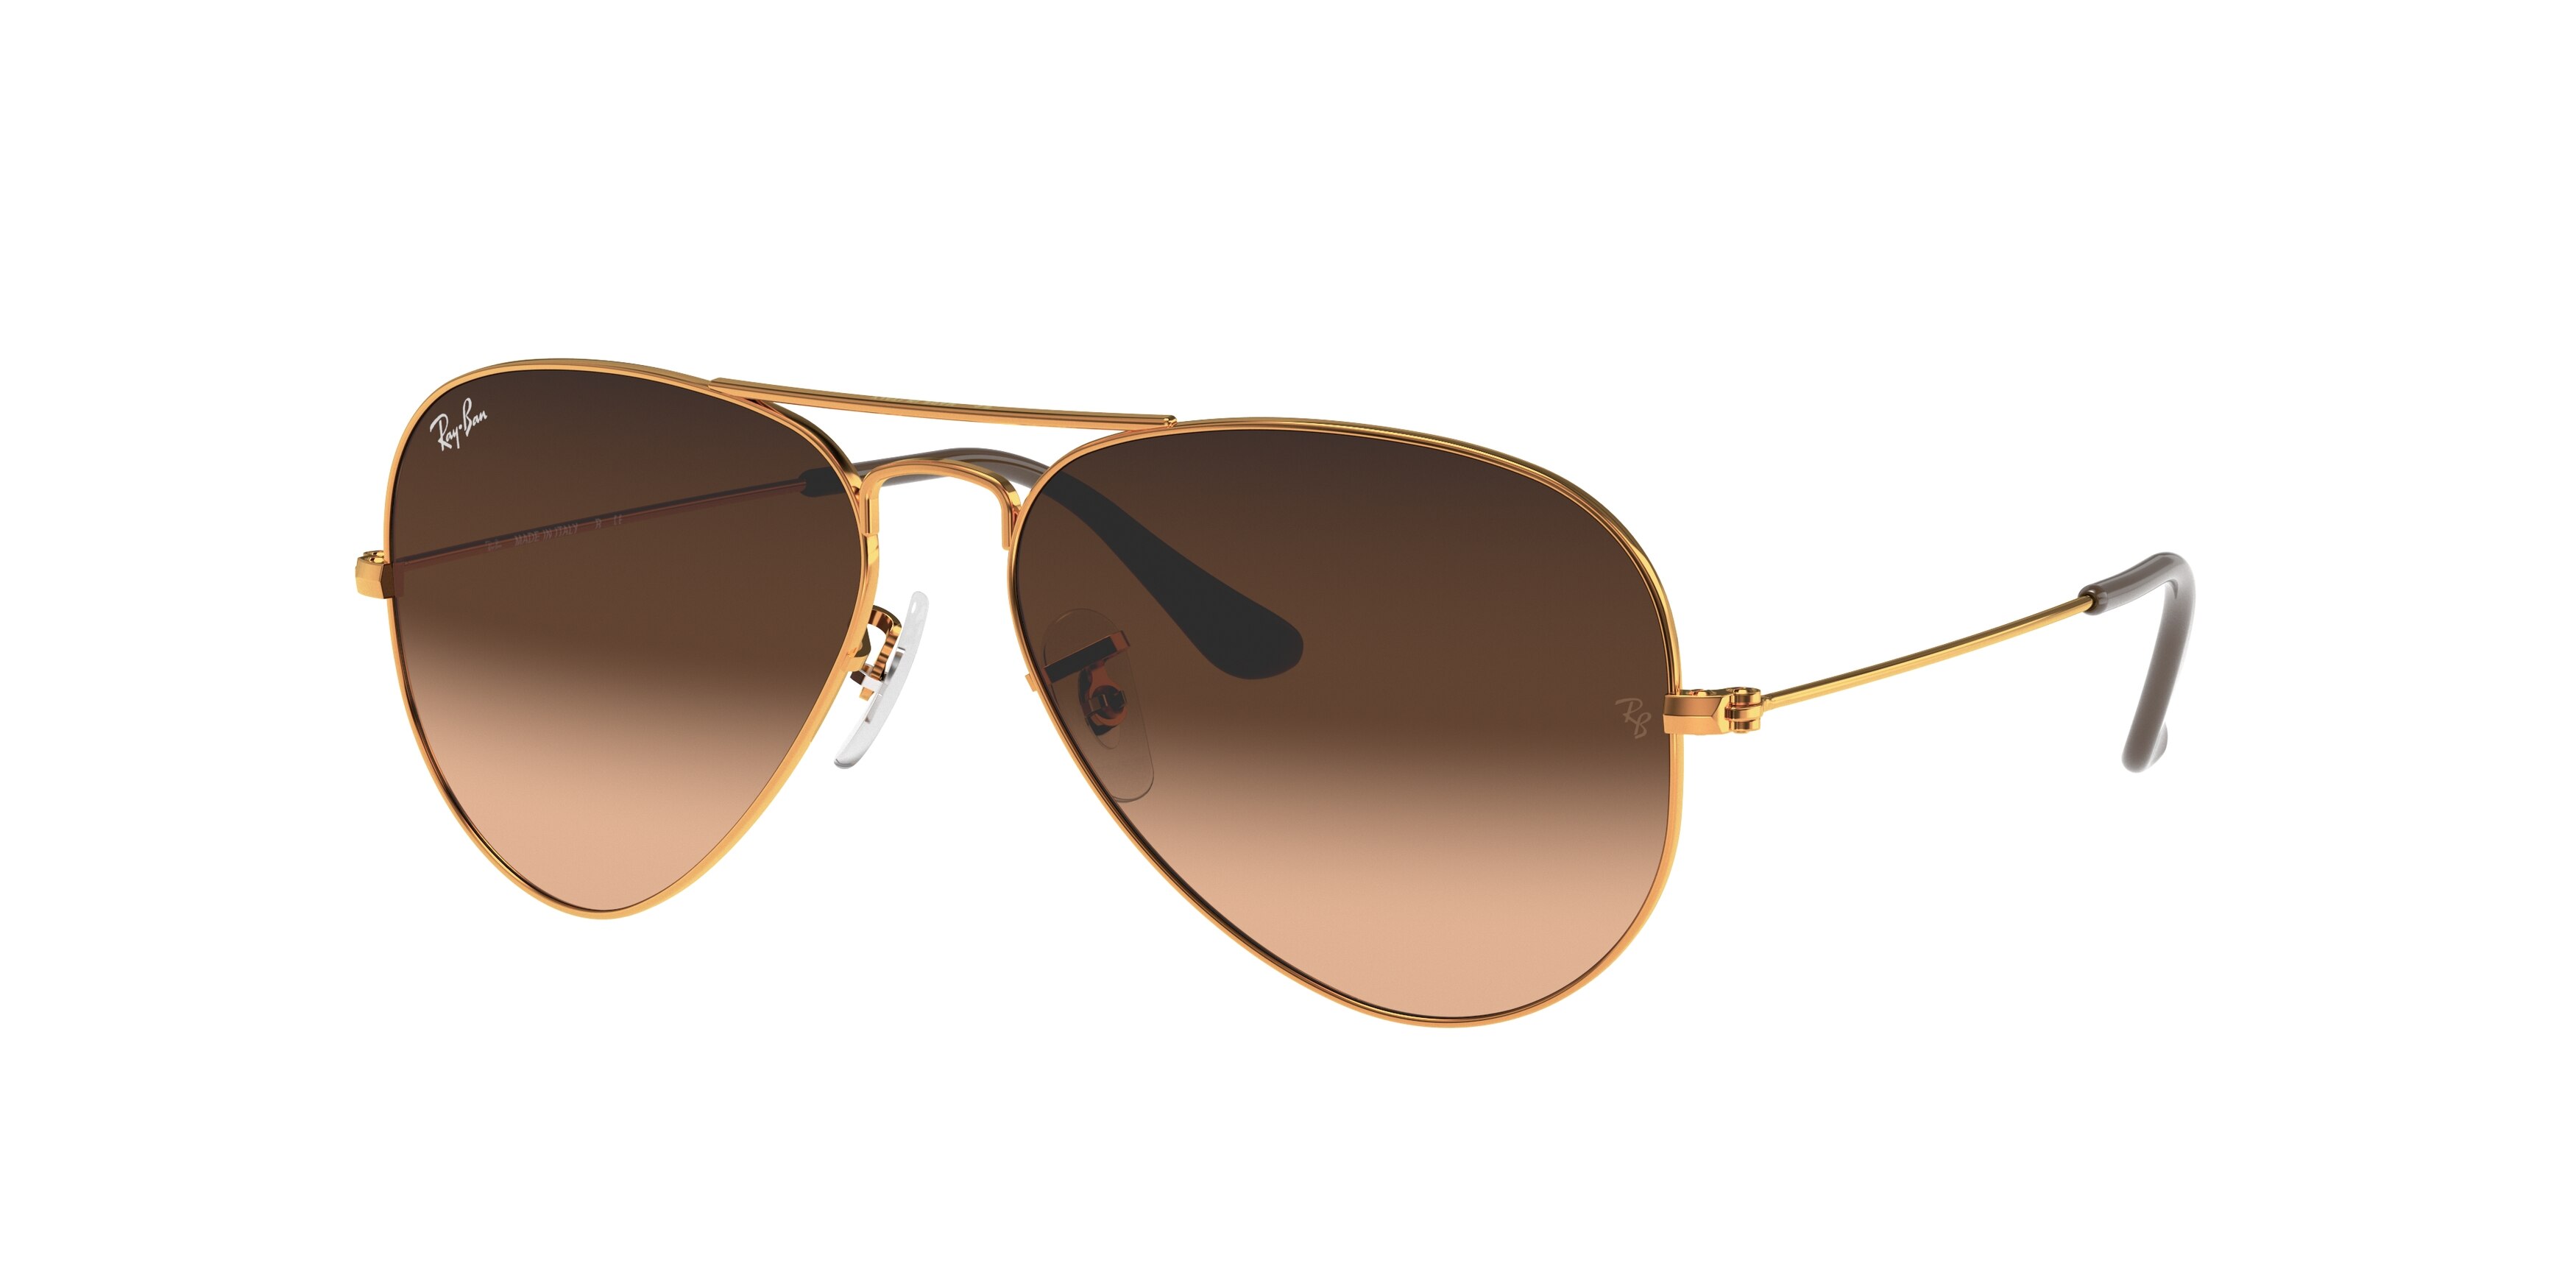 Ray Ban RB3025 90644I Aviator Large Metal | Buy online - Amevista